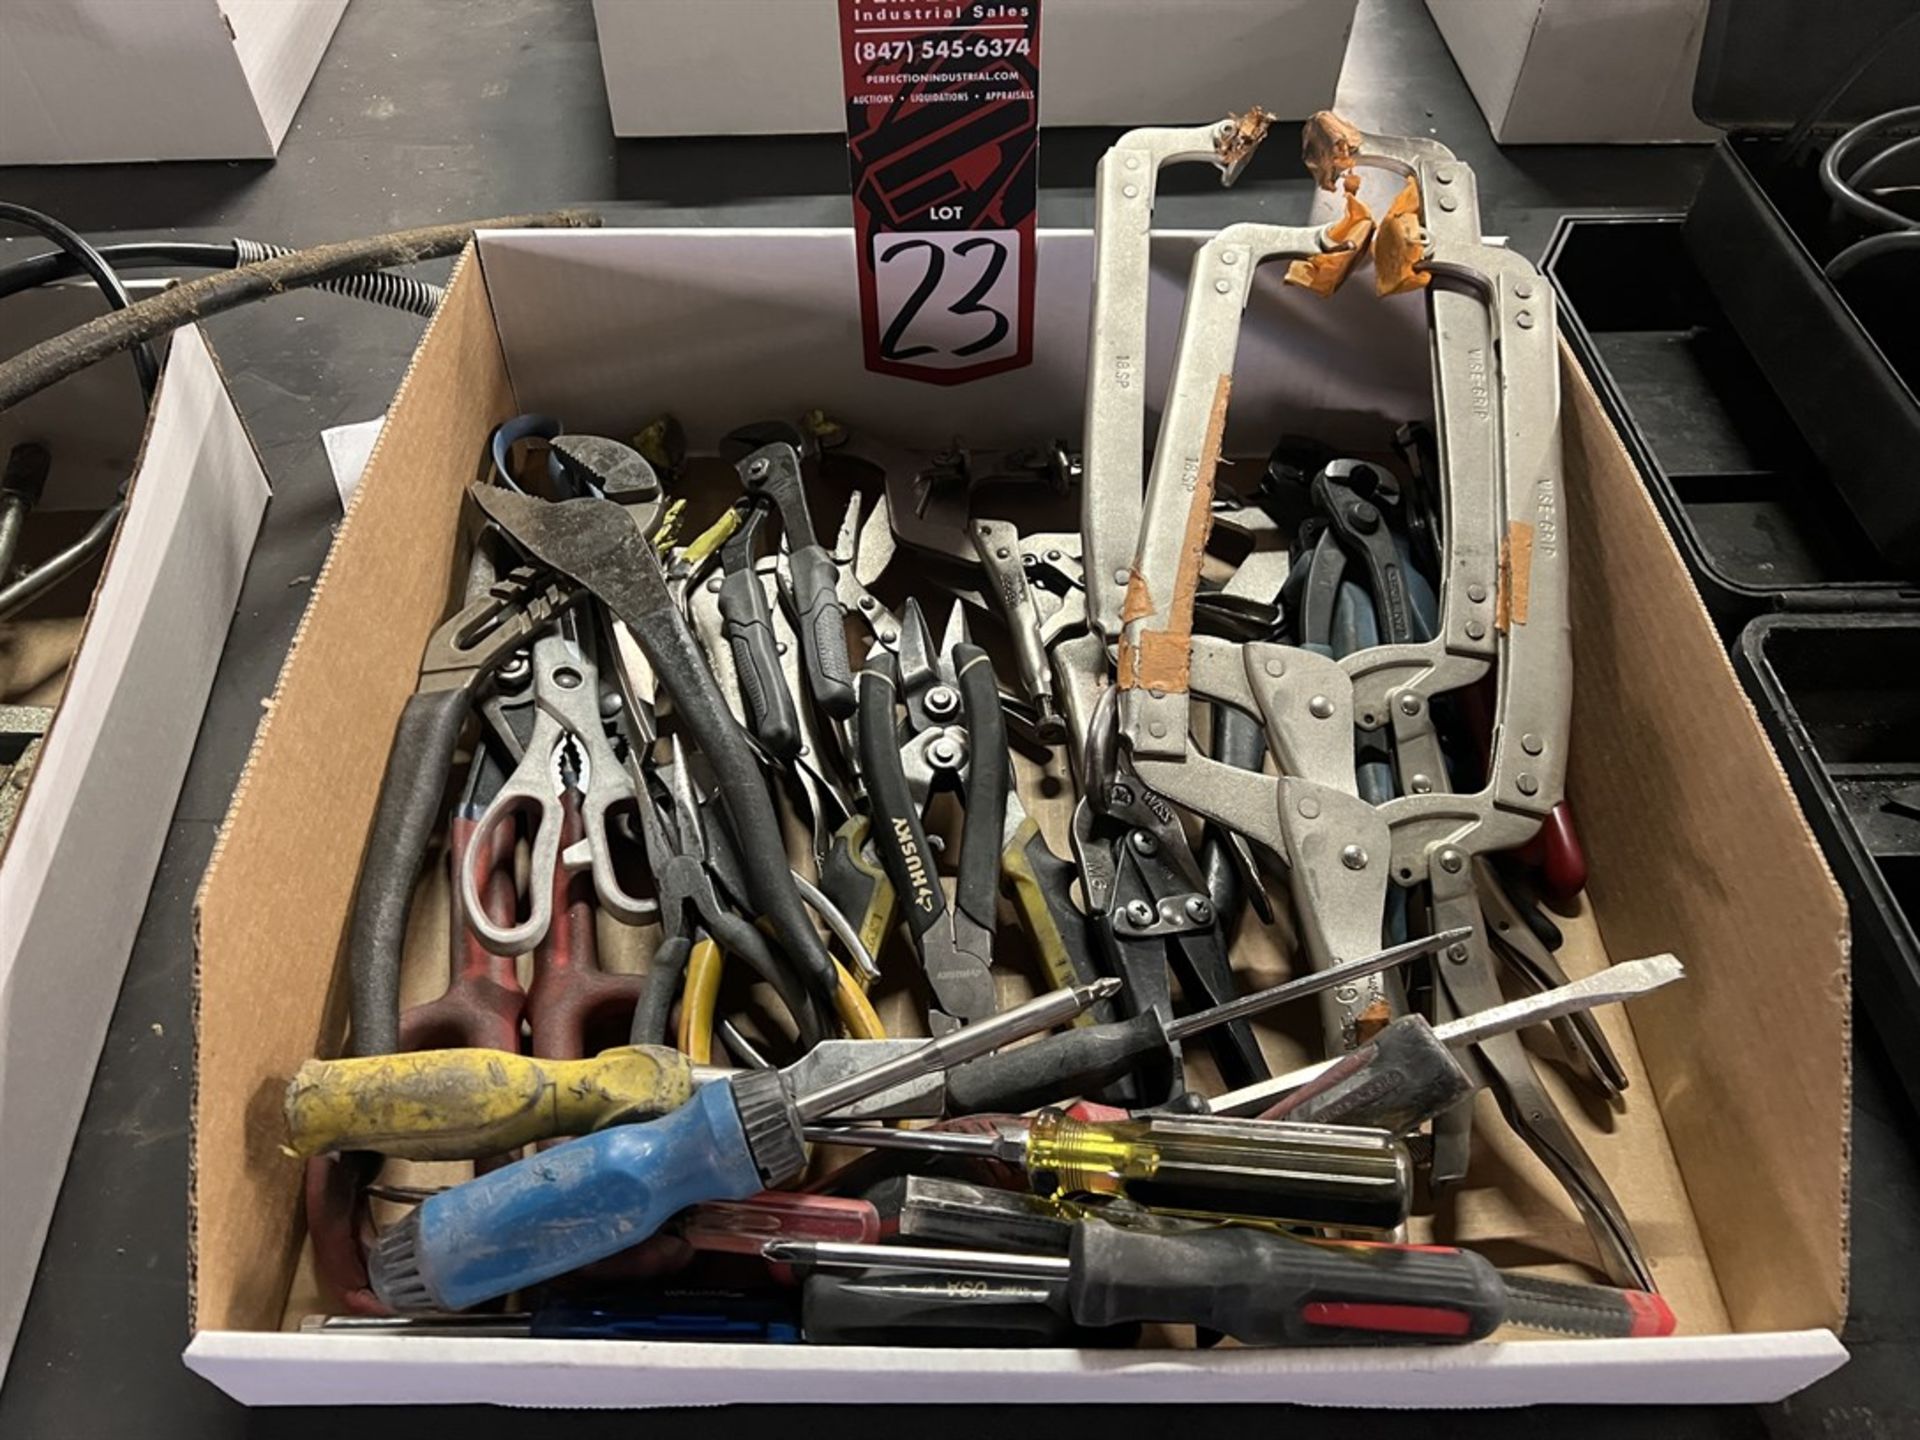 Lot of Assorted Hand Tools, Tool Boxes, Clamps and Pneumatic Tools